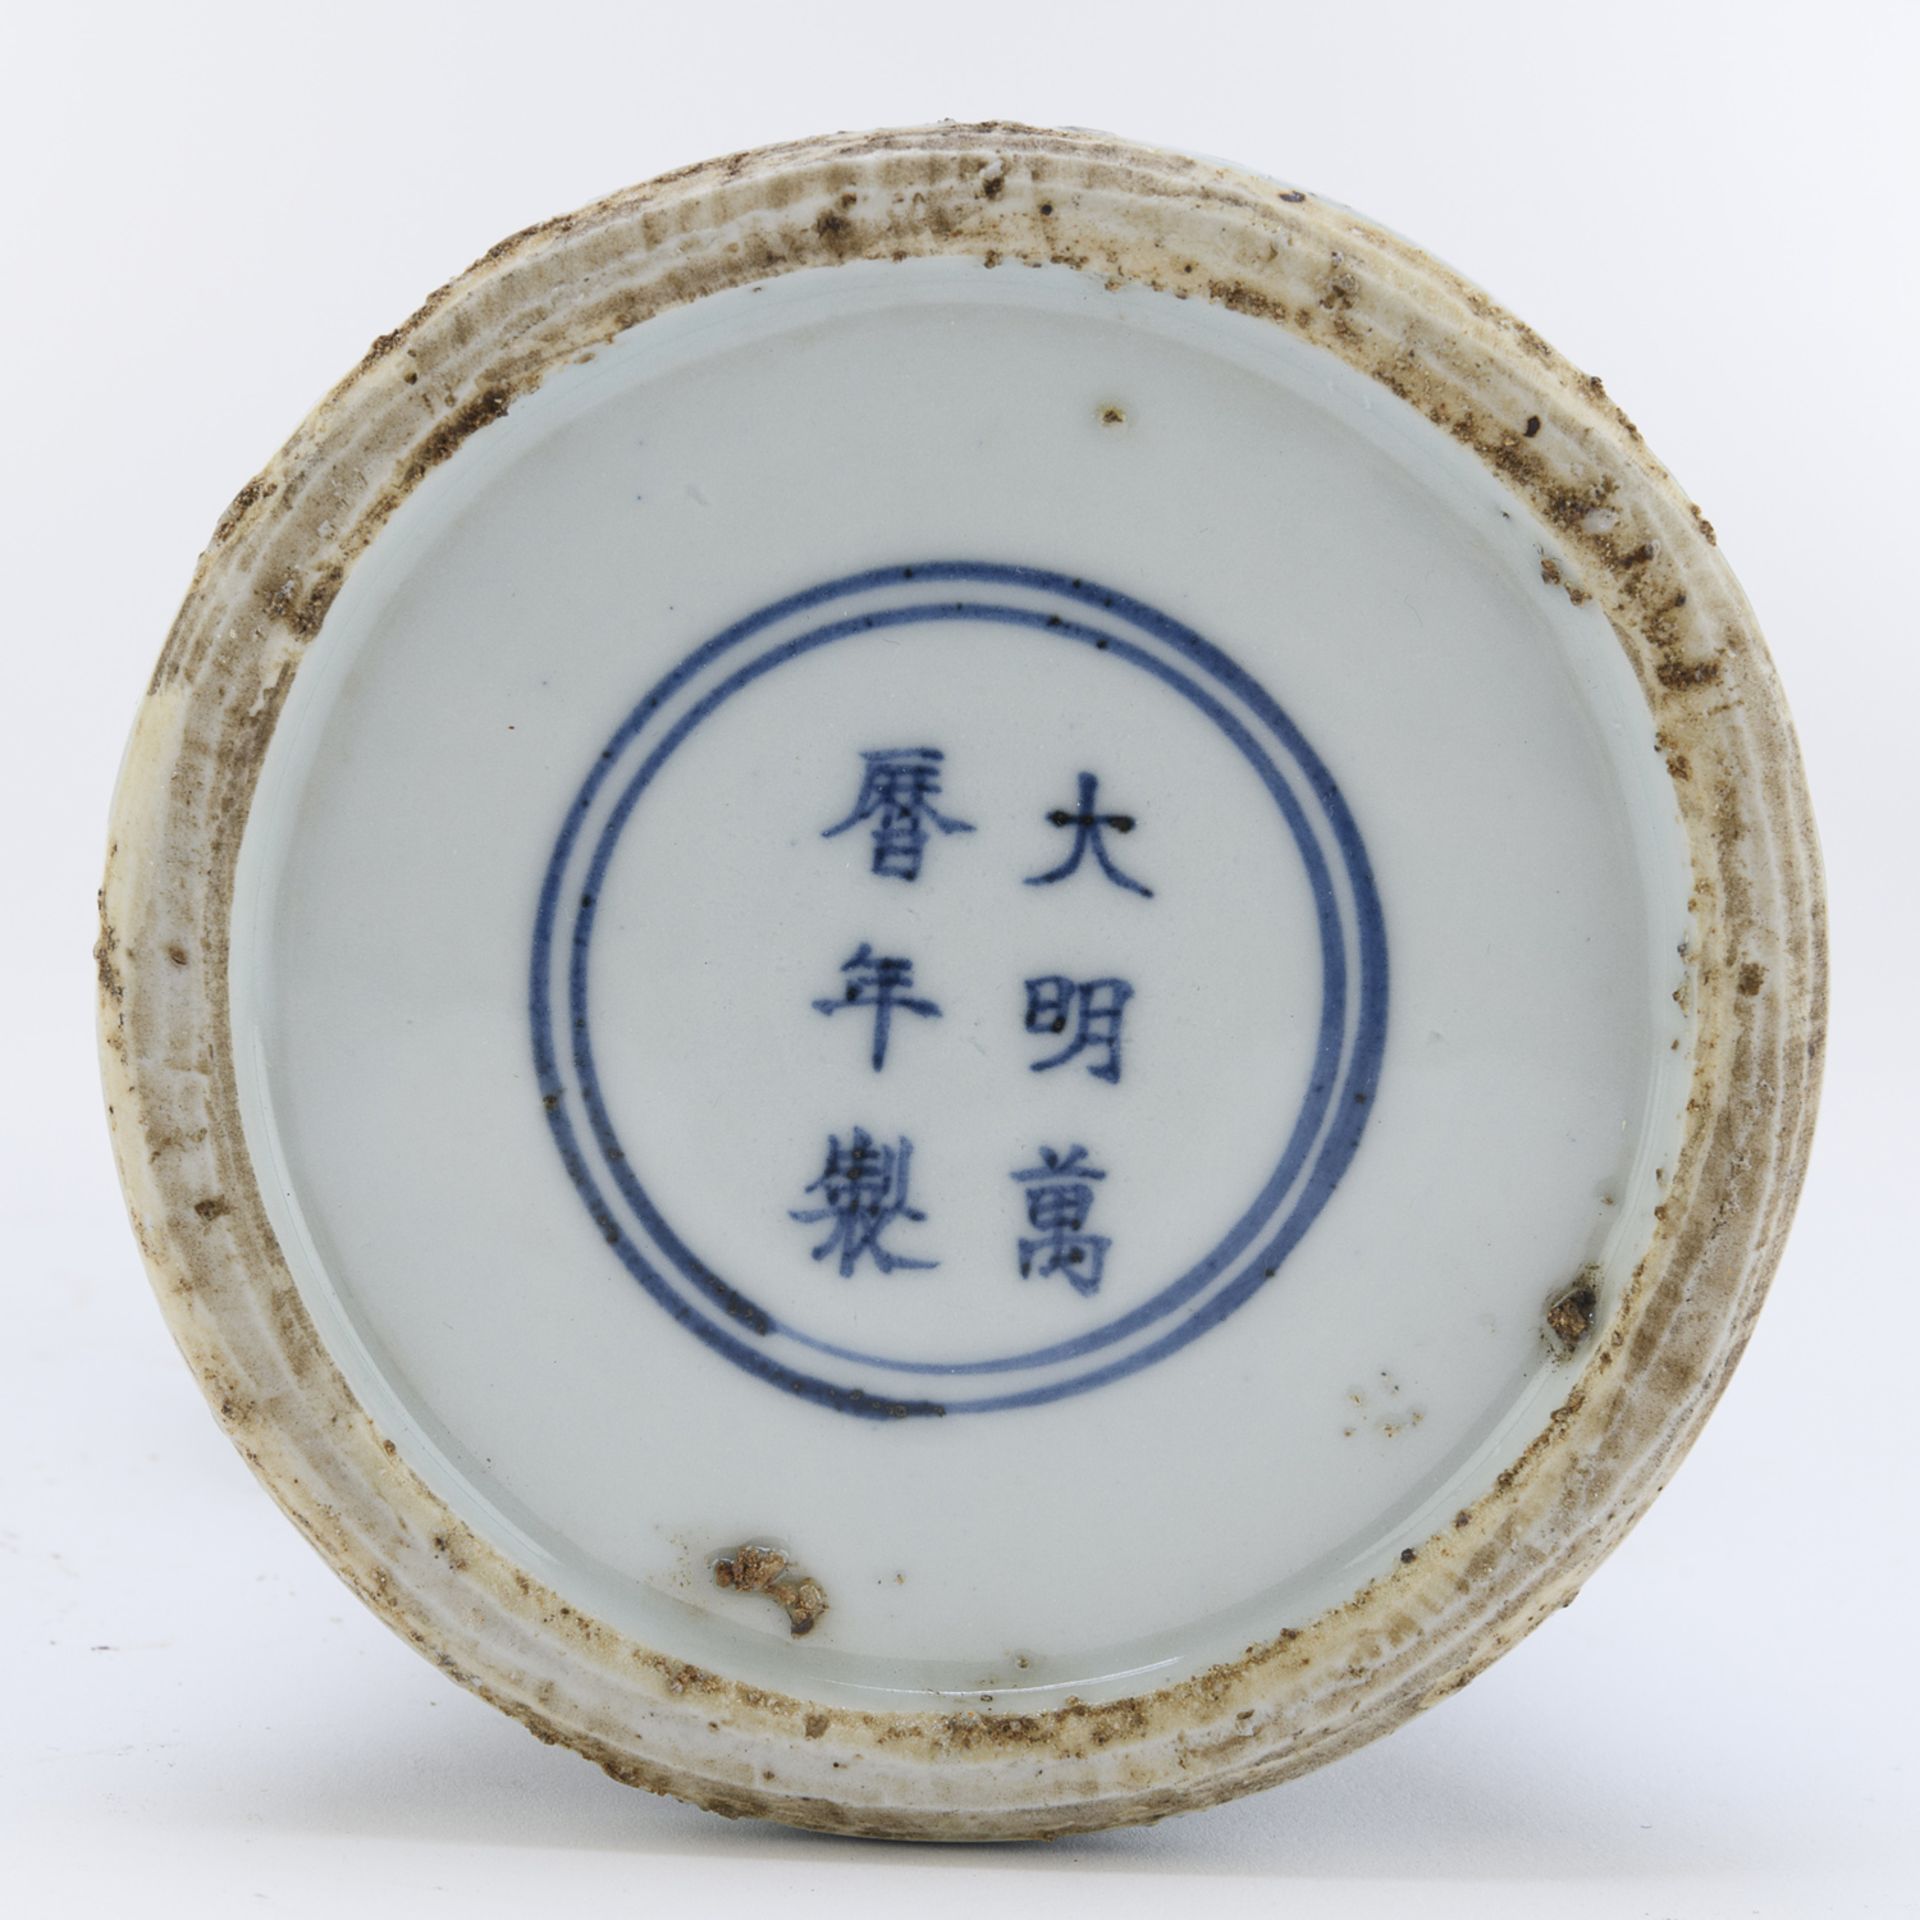 A CHINESE WHITE AND BLUE PORCELAIN VASE 19TH CENTURY. - Image 2 of 2